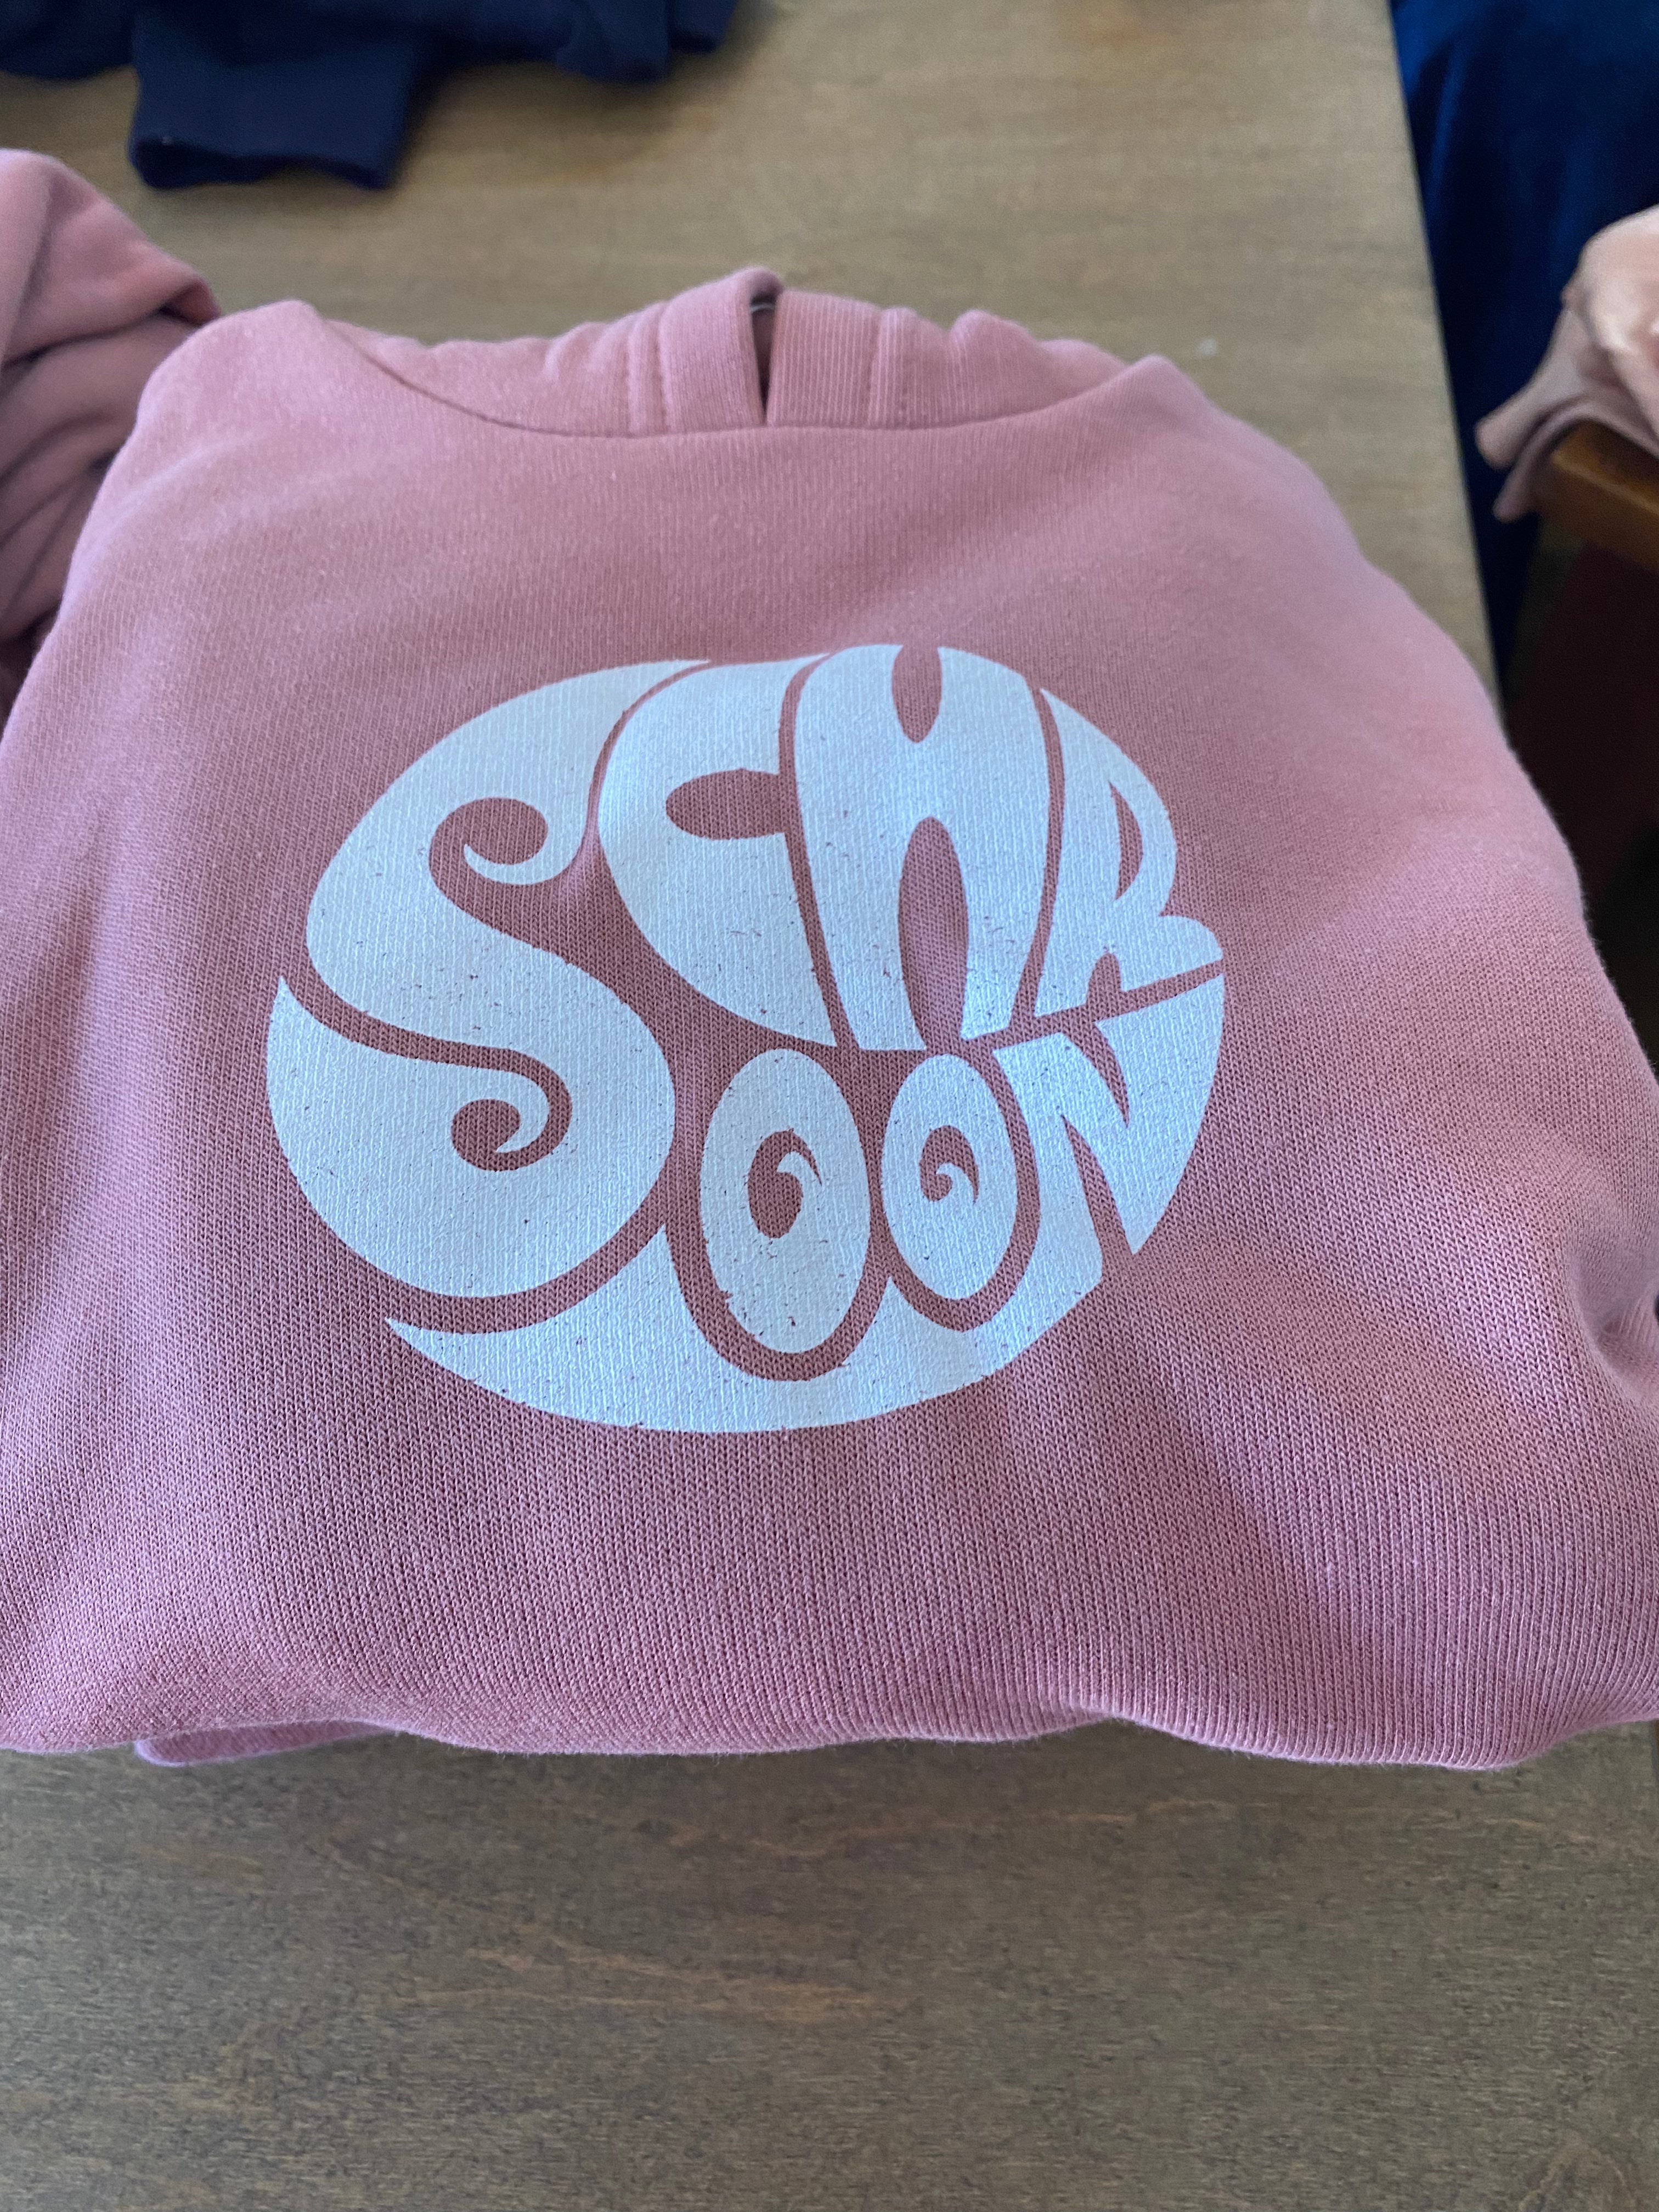 Schroon Hoodie Youth